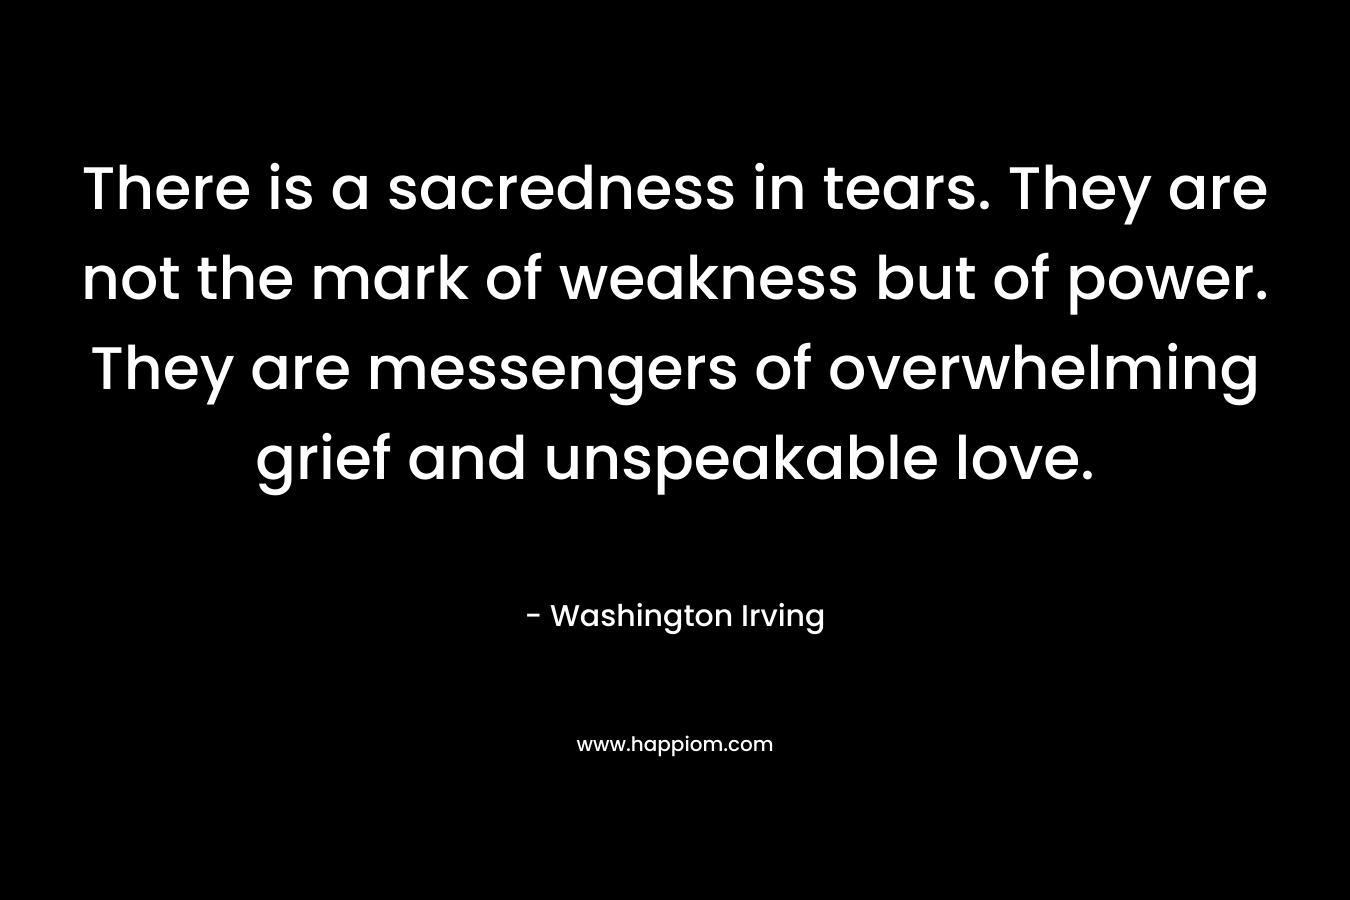 There is a sacredness in tears. They are not the mark of weakness but of power. They are messengers of overwhelming grief and unspeakable love. – Washington Irving